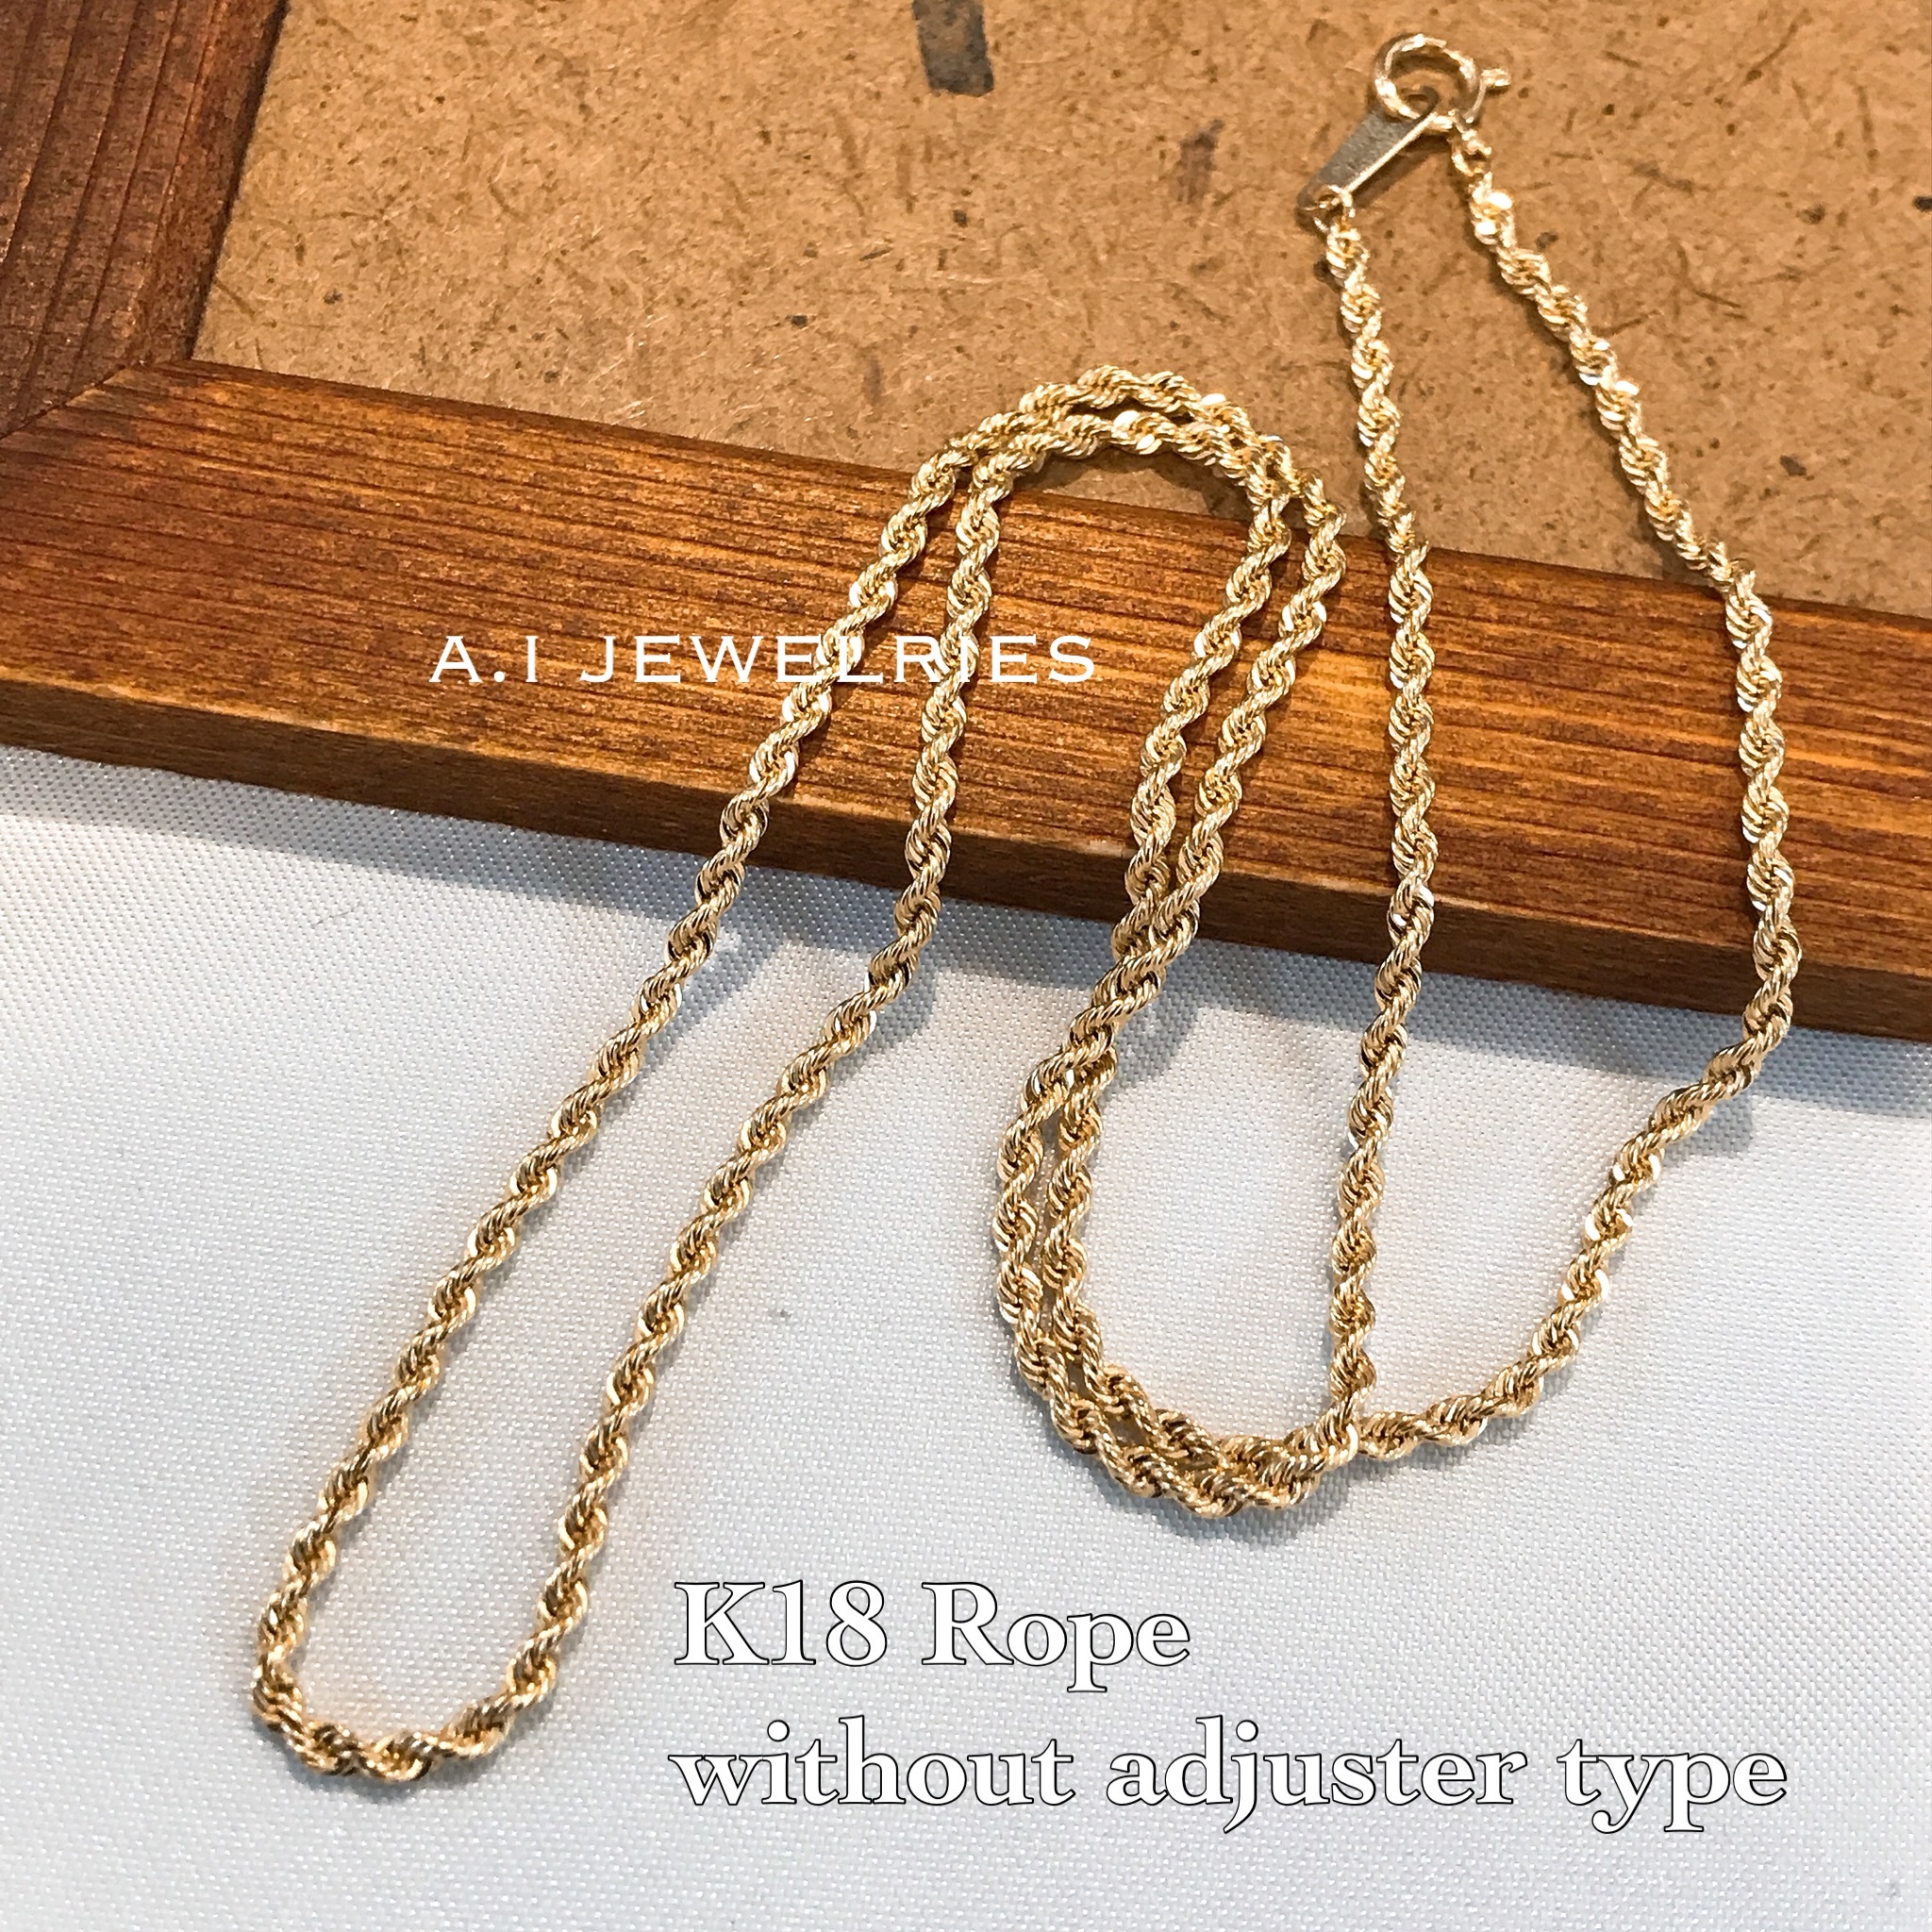 K18 18金 ロープ 50cm メンズ ネックレス チェーン ncklace | A.I JEWELRIES / エイアイジュエリーズ